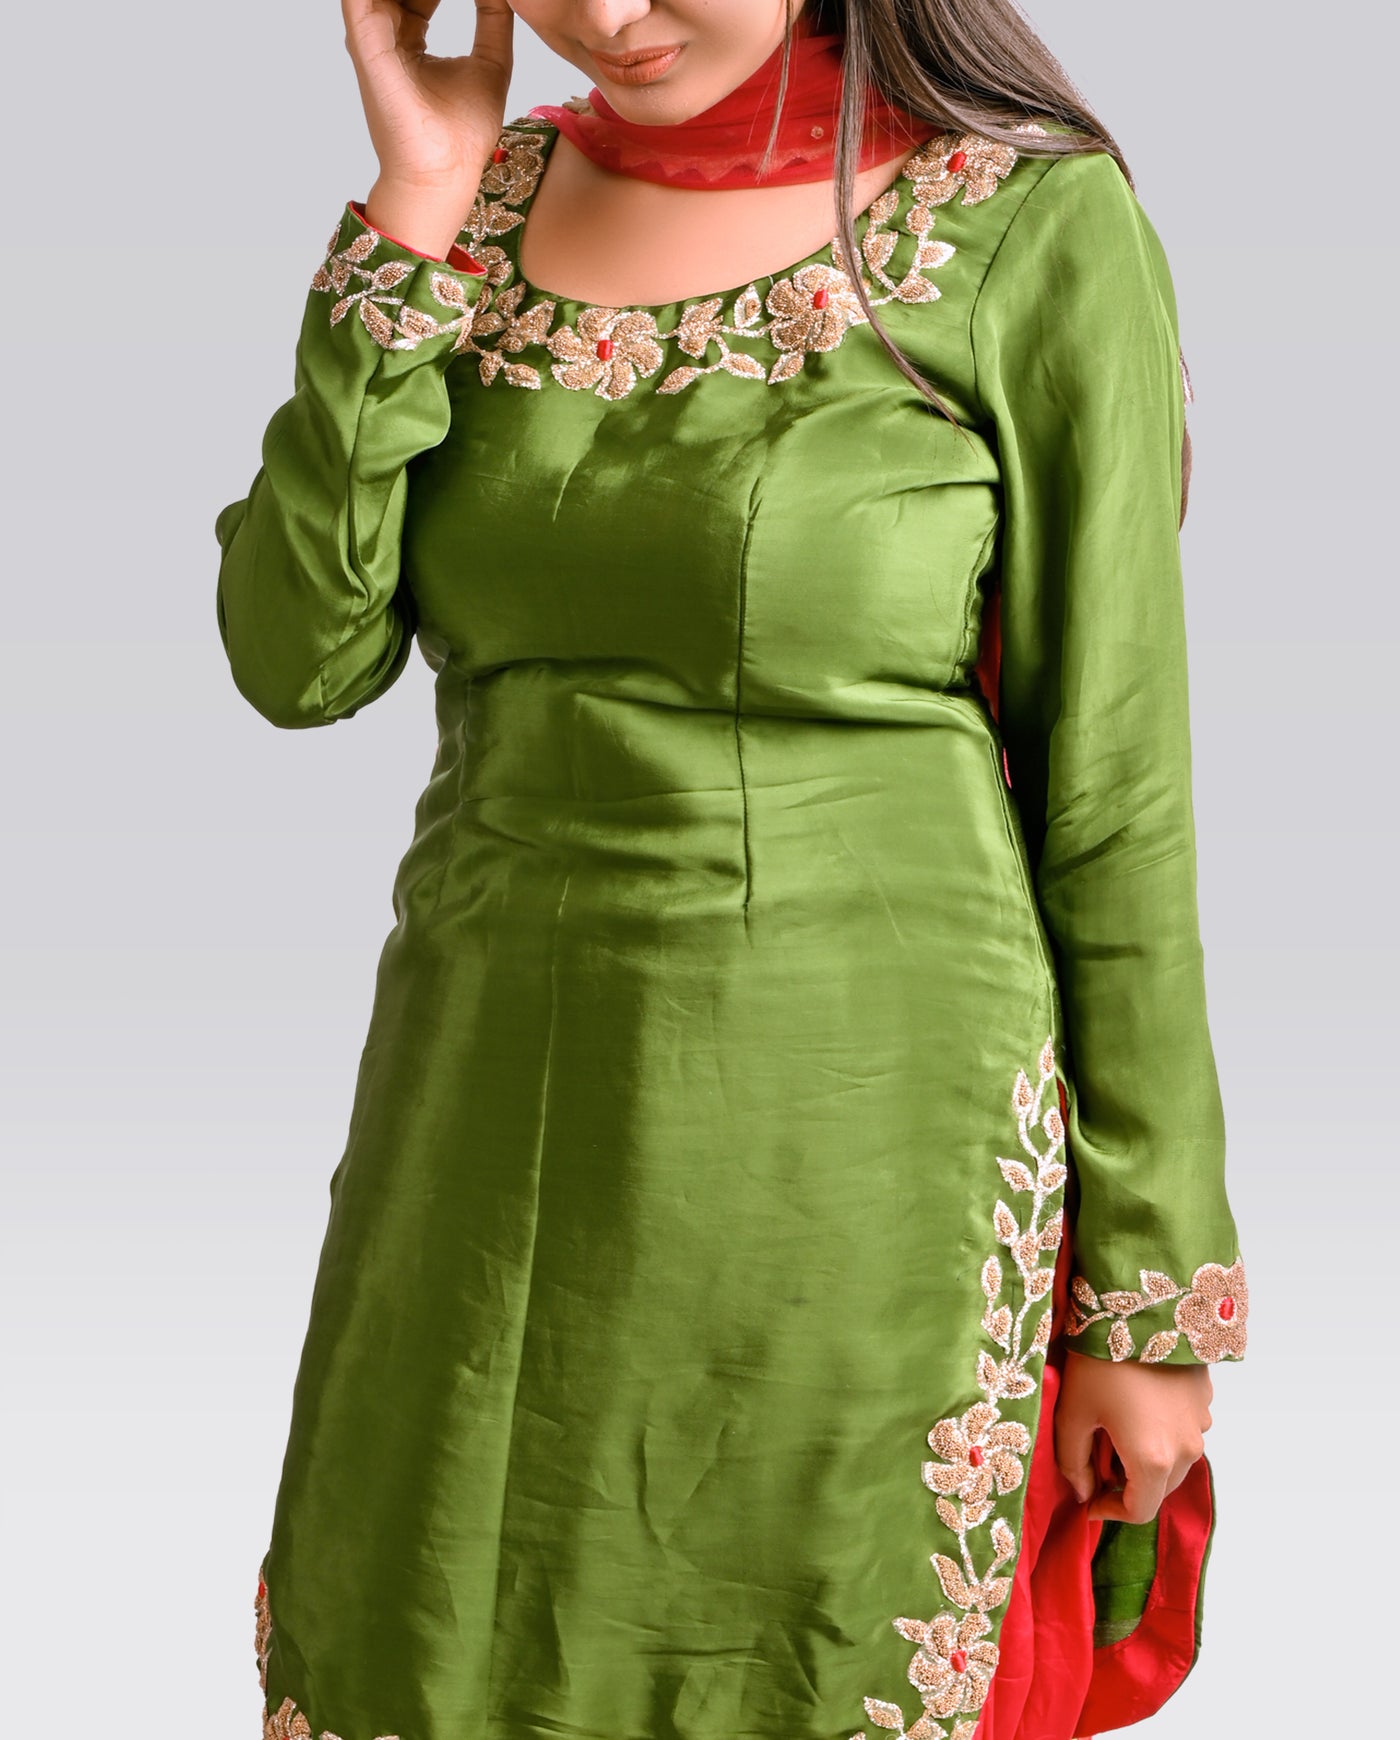 Silky Olive Patiala Salwar Indian Clothing in Denver, CO, Aurora, CO, Boulder, CO, Fort Collins, CO, Colorado Springs, CO, Parker, CO, Highlands Ranch, CO, Cherry Creek, CO, Centennial, CO, and Longmont, CO. NATIONWIDE SHIPPING USA- India Fashion X